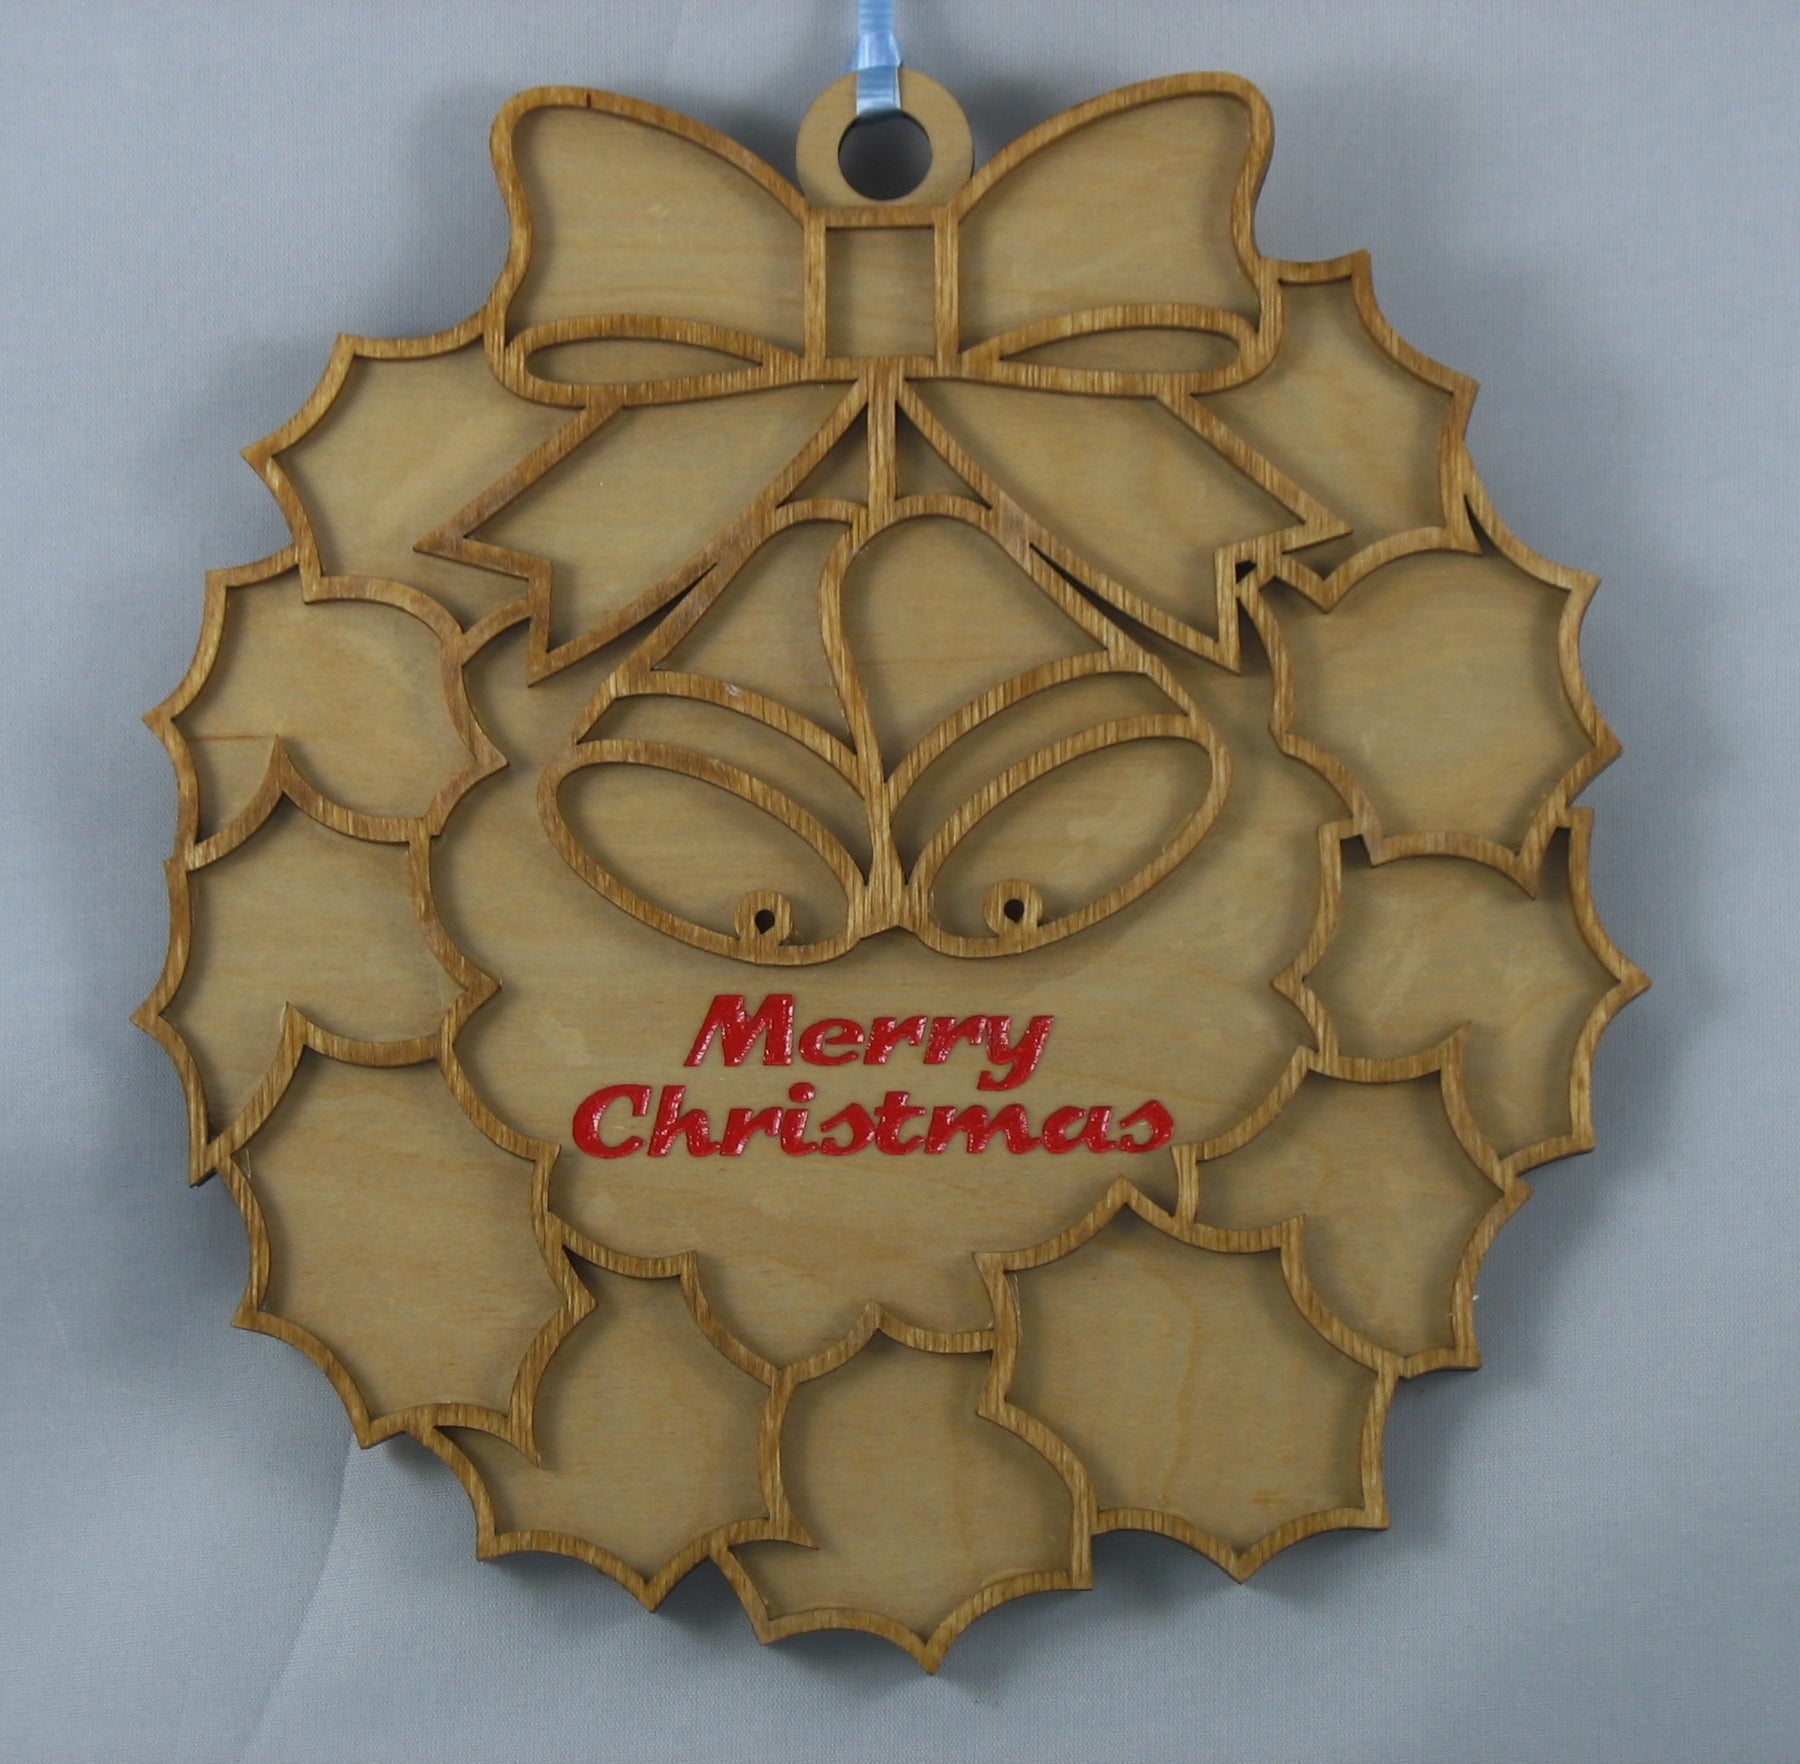 Merry Christmas Wreath Wall Plaque